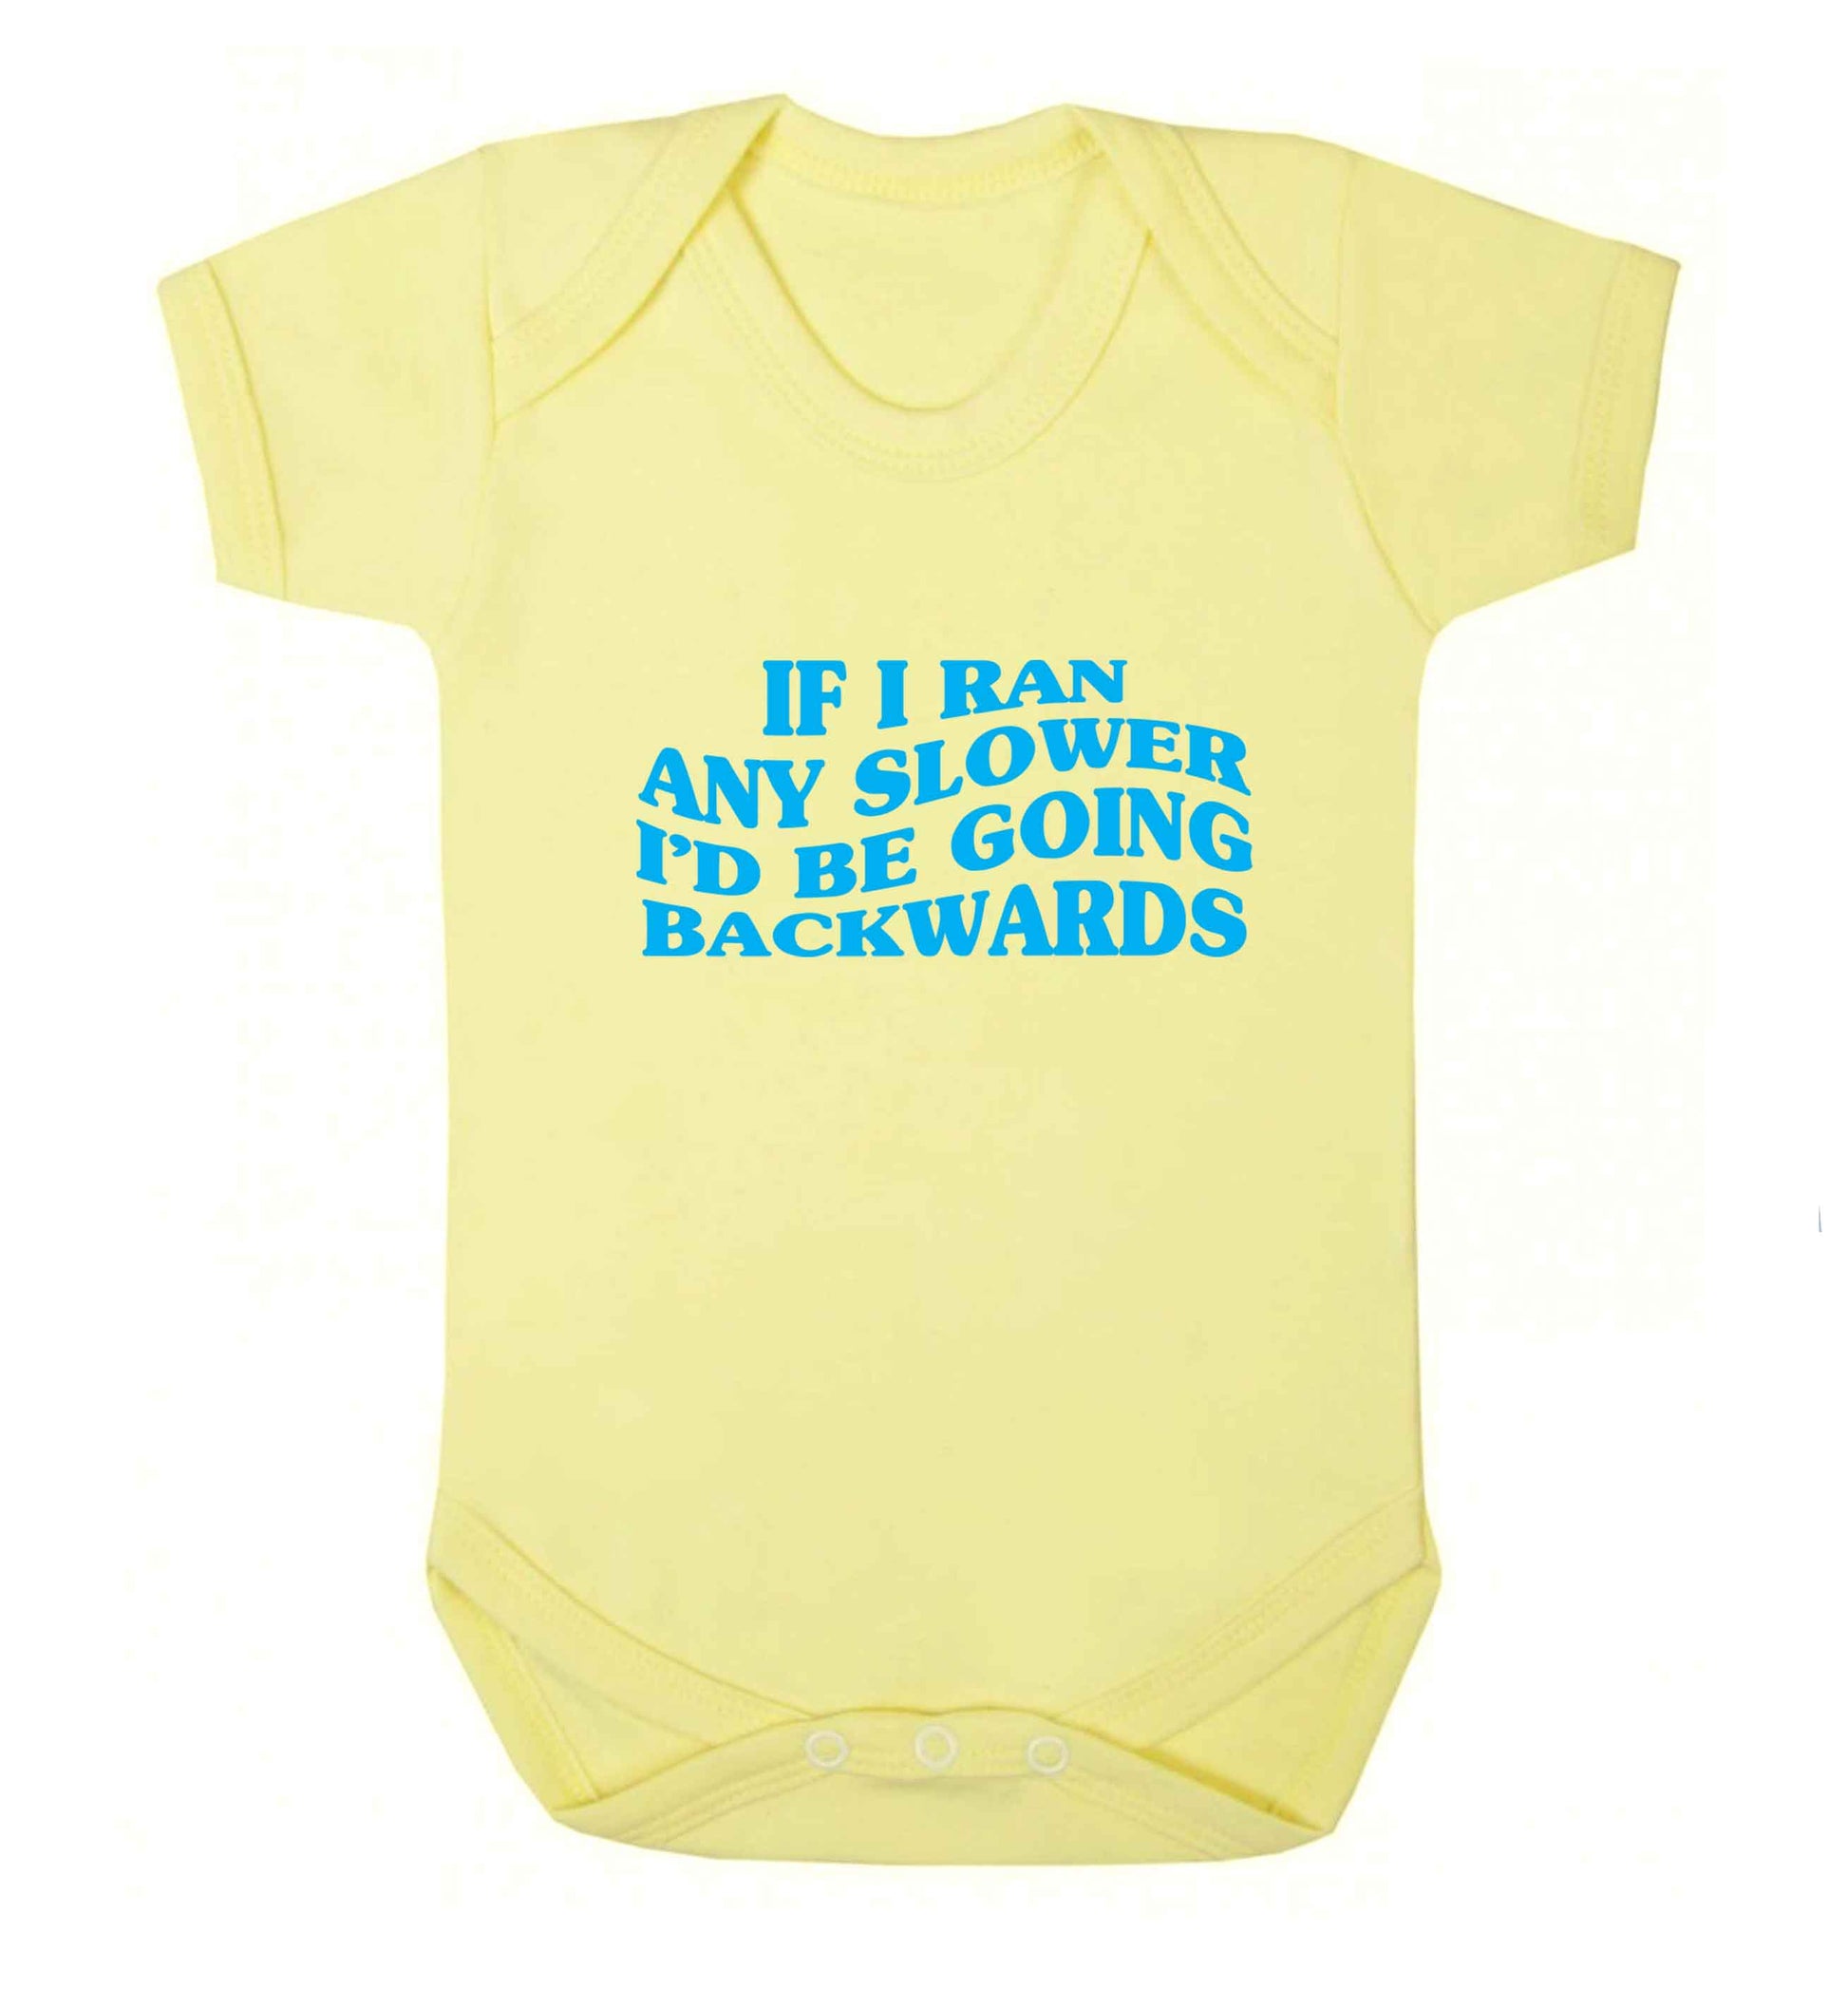 If I ran any slower I'd be going backwards baby vest pale yellow 18-24 months